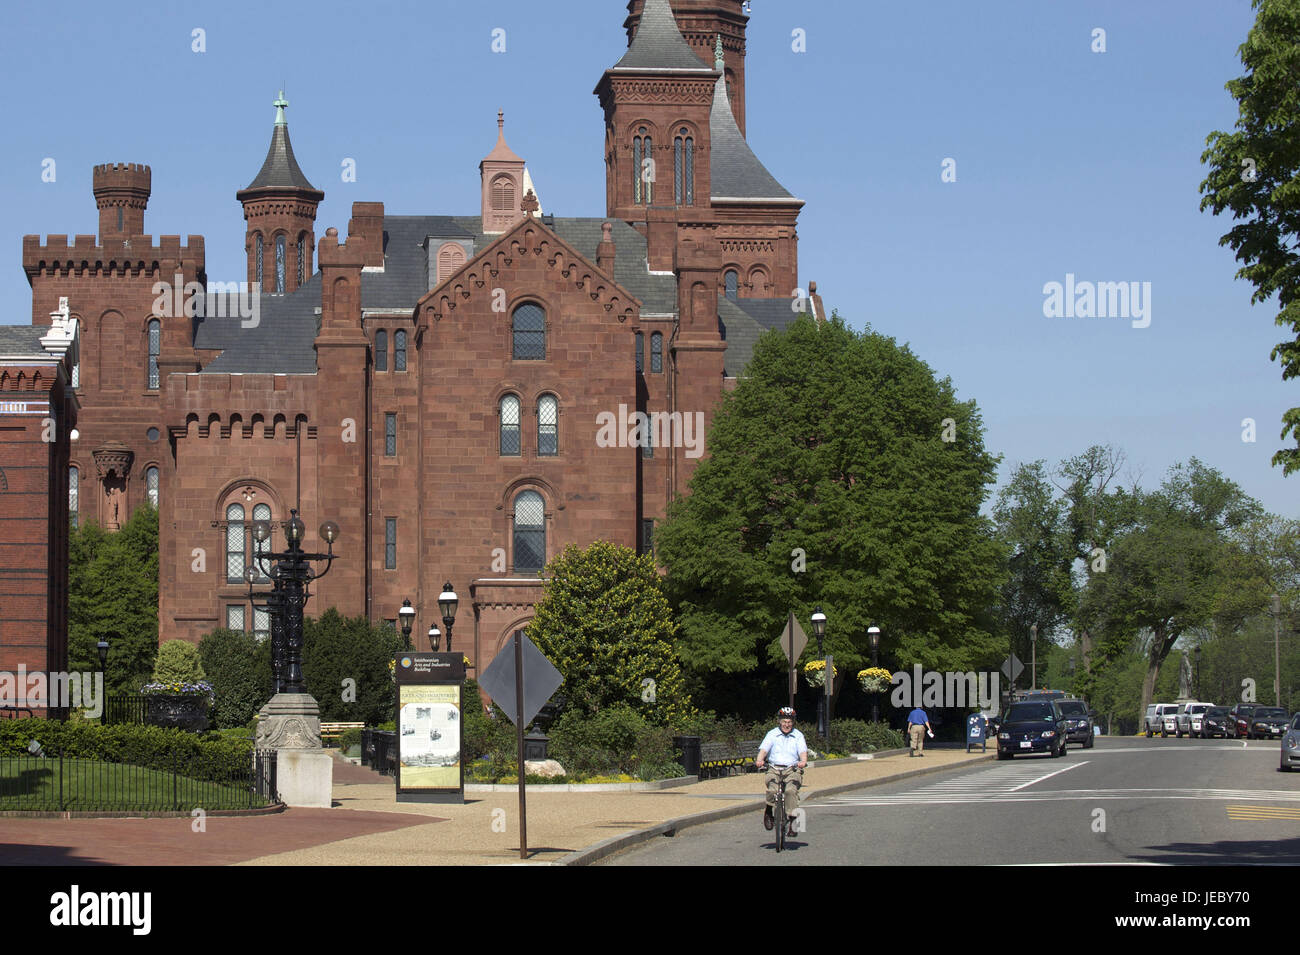 The USA, America, Washington D.C., the Nationwide Mall, in the background the building of the Smithsonian institution, Stock Photo